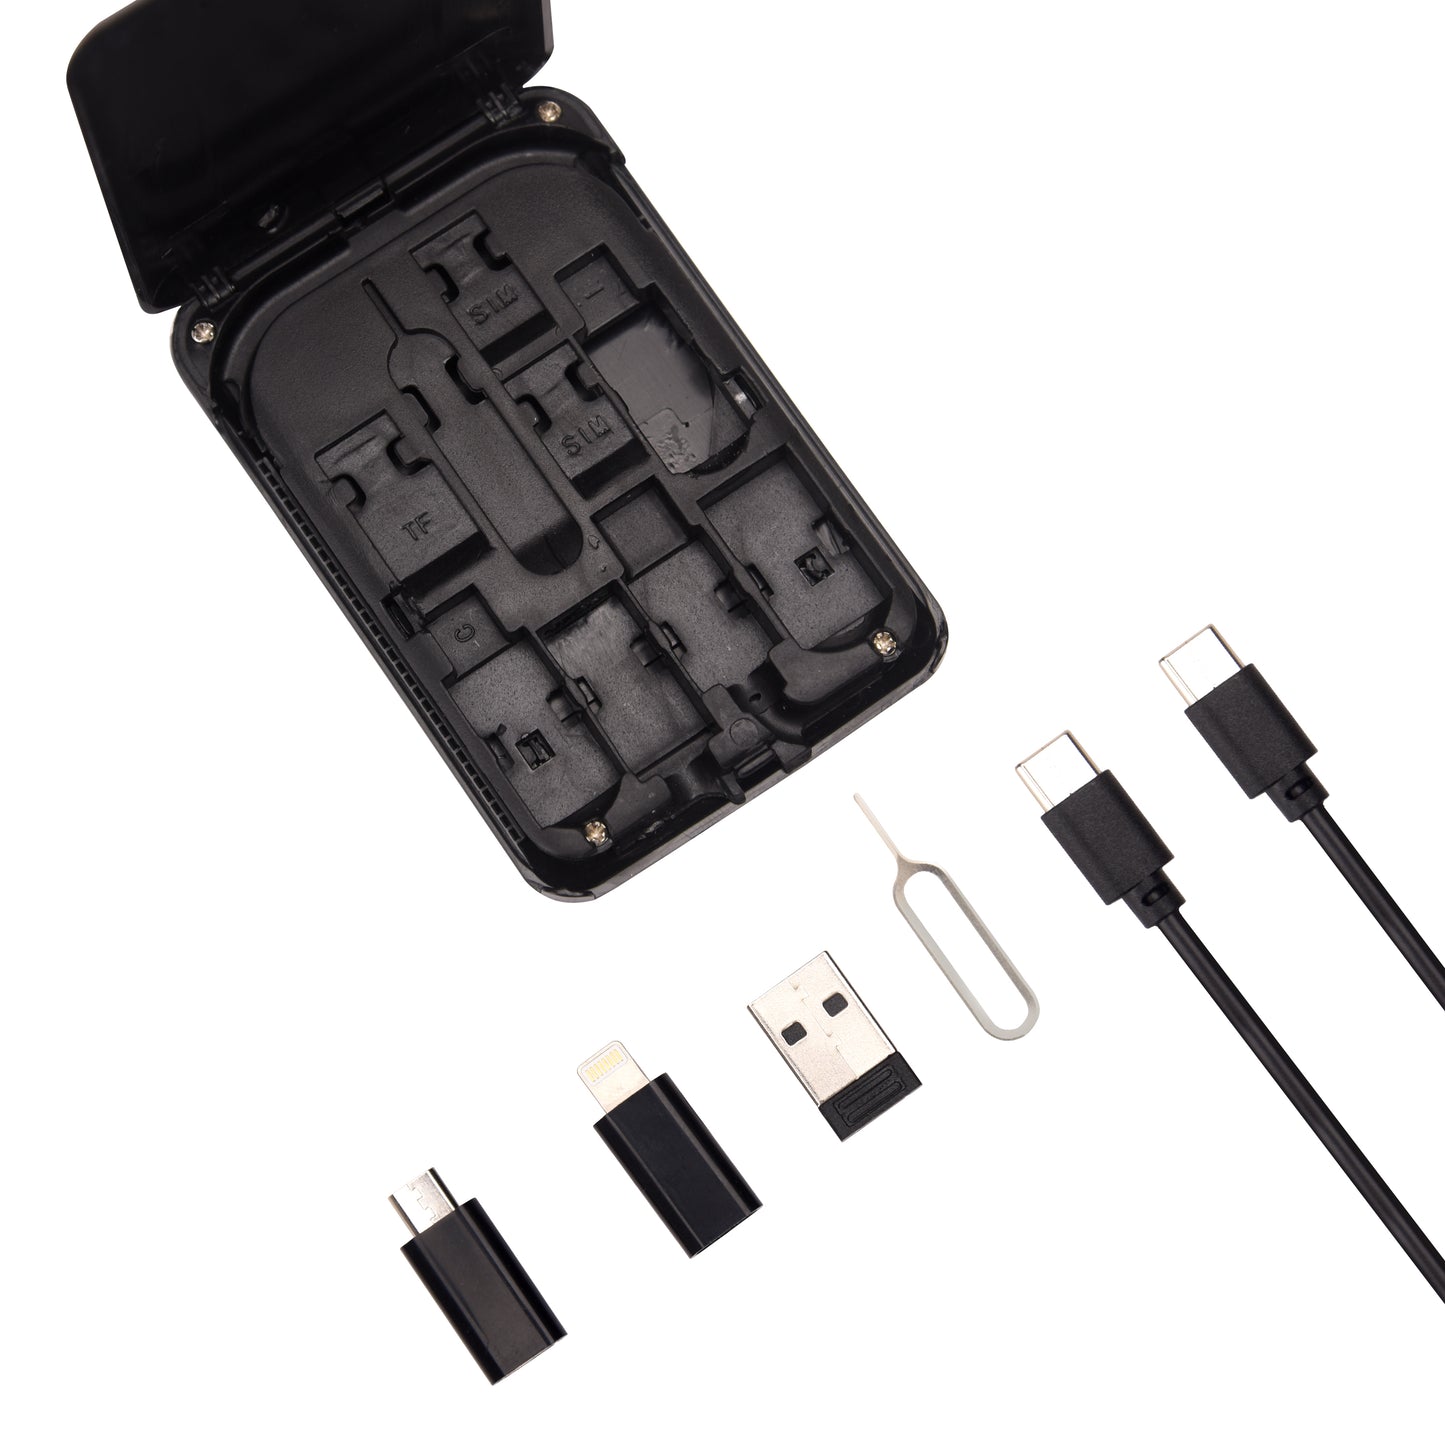 Mini Pocket Multifunctional Cable Kit - For Office Use, Personal Use, or Corporate Gifting HK2527